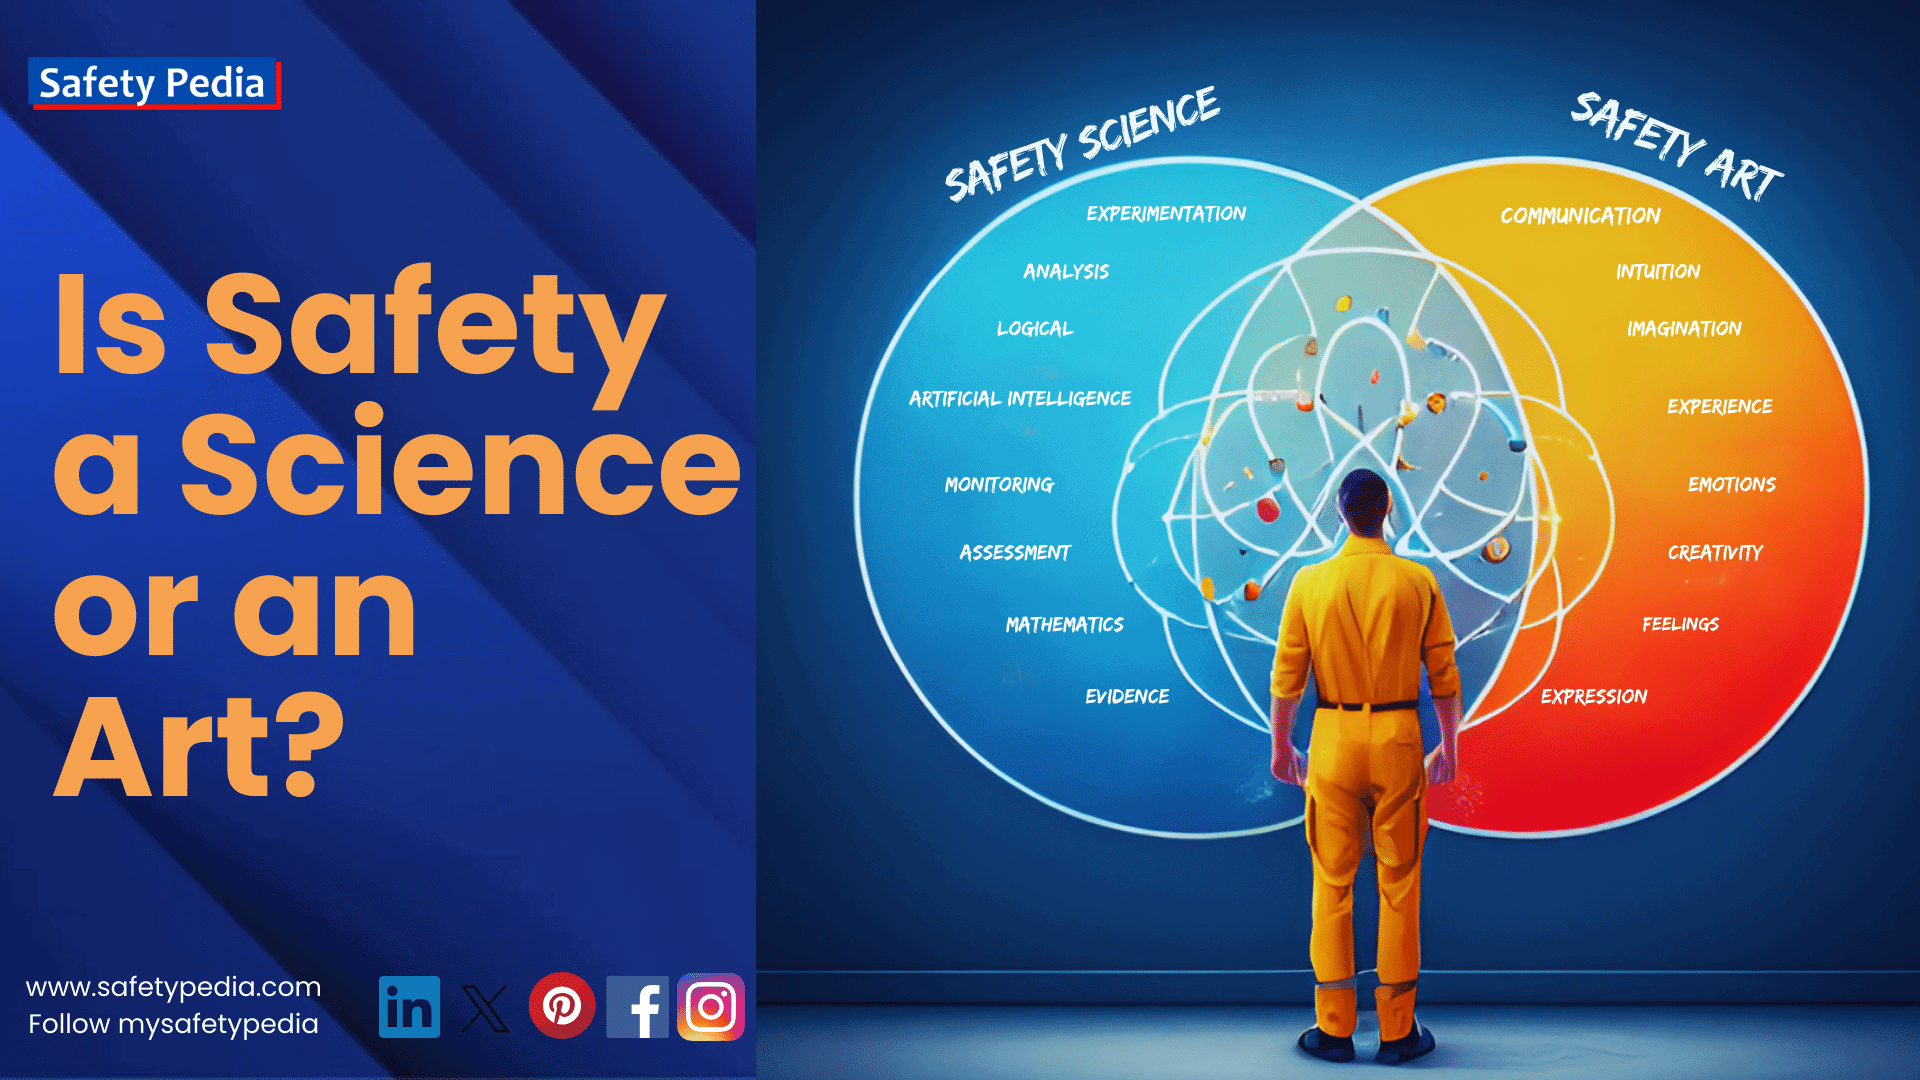 is safety an art or science. What is Science? Science is defined as the systematic and objective investigation of natural phenomena through observation, experimentation and analysis. Science aims to produce reliable and verifiable knowledge that can be used to explain, predict and control reality. Science relies on empirical evidence, logical reasoning, mathematical models, and objectivity to test hypotheses and peer review to ensure the validity and accuracy of its findings. Science also follows certain ethical standards and norms that guide its conduct and dissemination. What is Art? Art is the expression of human creativity and imagination, often in a visual, auditory, or literary form. Art aims to communicate ideas, emotions, and experiences to an audience. Art aims to communicate ideas, feelings and emotions that transcend the ordinary and everyday aspects of reality. Art relies on intuition, imagination, aesthetics and personal style to create original and unique works that reflect the artist's vision and perspective. Art also follows certain aesthetic standards and norms that guide its evaluation and appreciation. What is Safety? Safety is the state of being free from danger or injury. Safety can also refer to the actions or measures taken to prevent or reduce the risk of harm or loss. Safety can be influenced by many factors, such as human behavior, environmental conditions, technological systems, organizational culture, and regulatory frameworks.